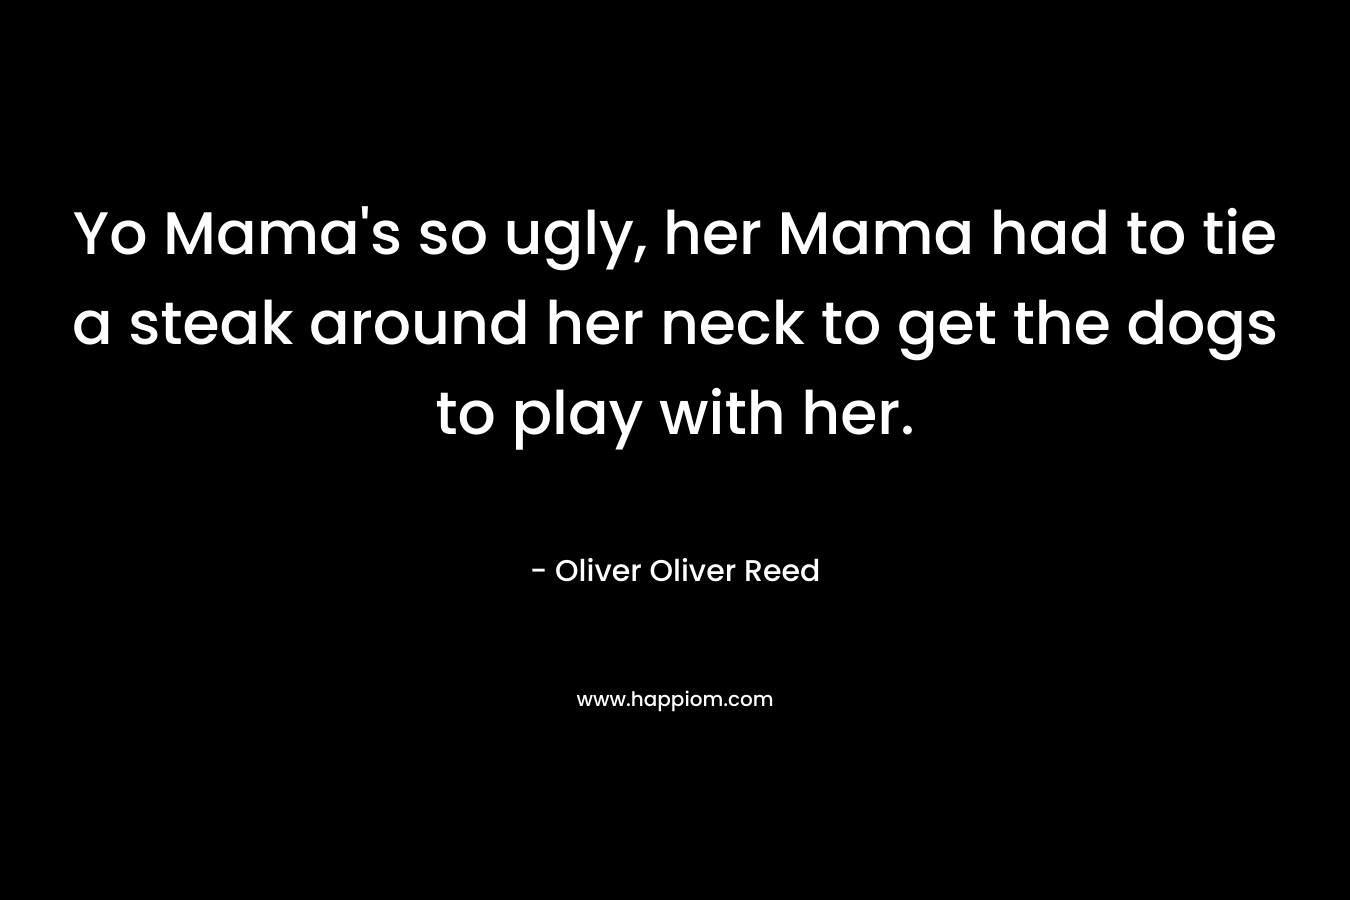 Yo Mama's so ugly, her Mama had to tie a steak around her neck to get the dogs to play with her.